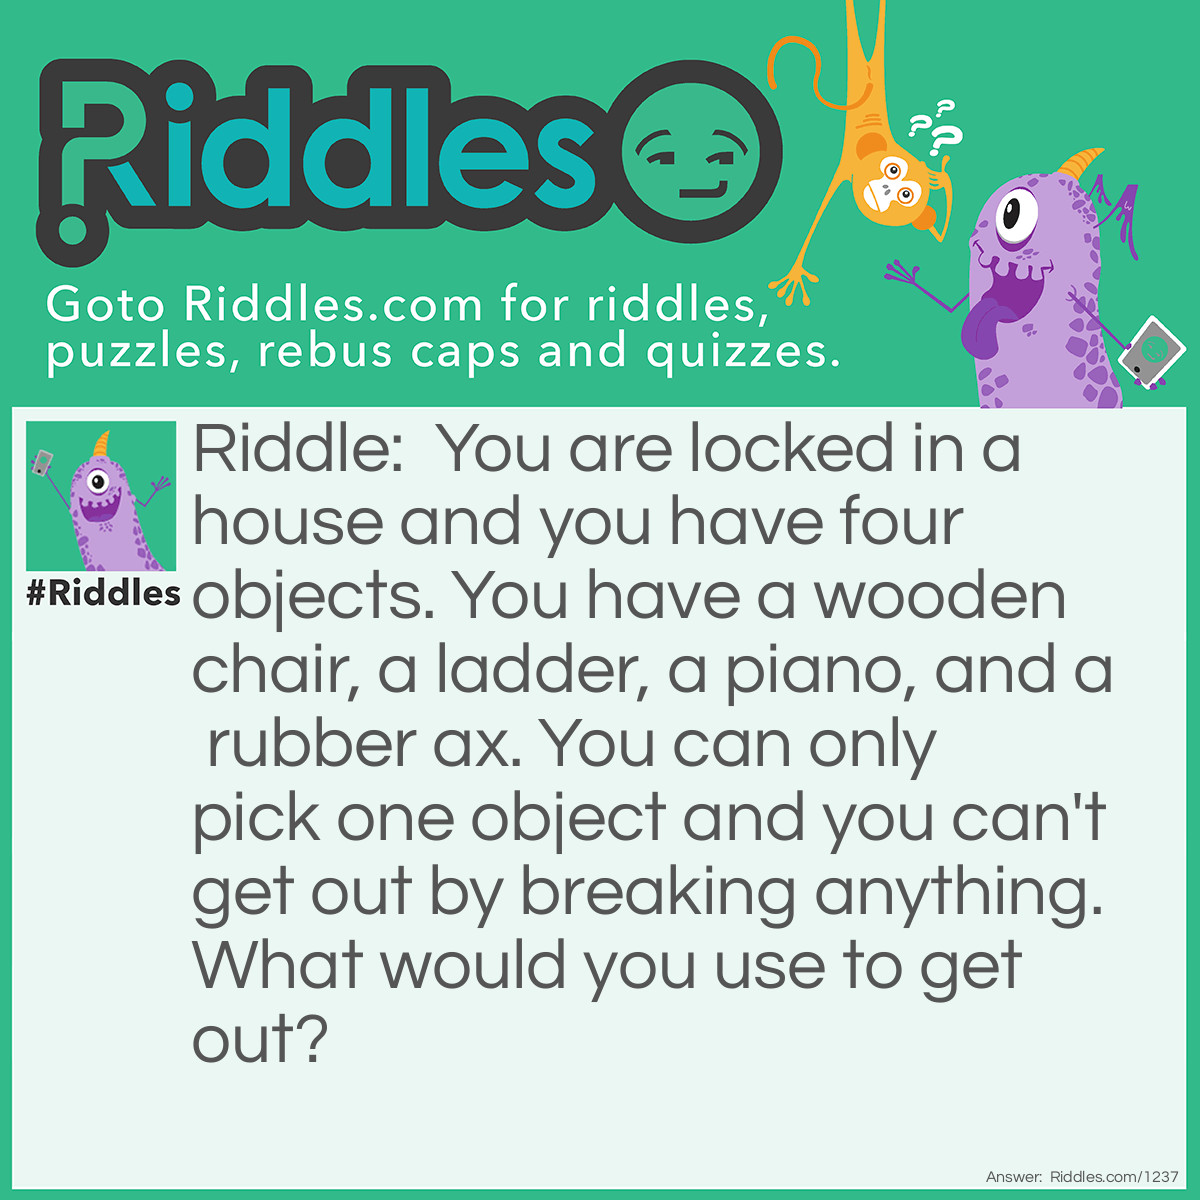 Riddle: You are locked in a house and you have four objects. You have a wooden chair, a ladder, a piano, and a rubber ax. You can only pick one object and you can't get out by breaking anything. What would you use to get out? Answer: You use the piano KEYS to ulock the door!